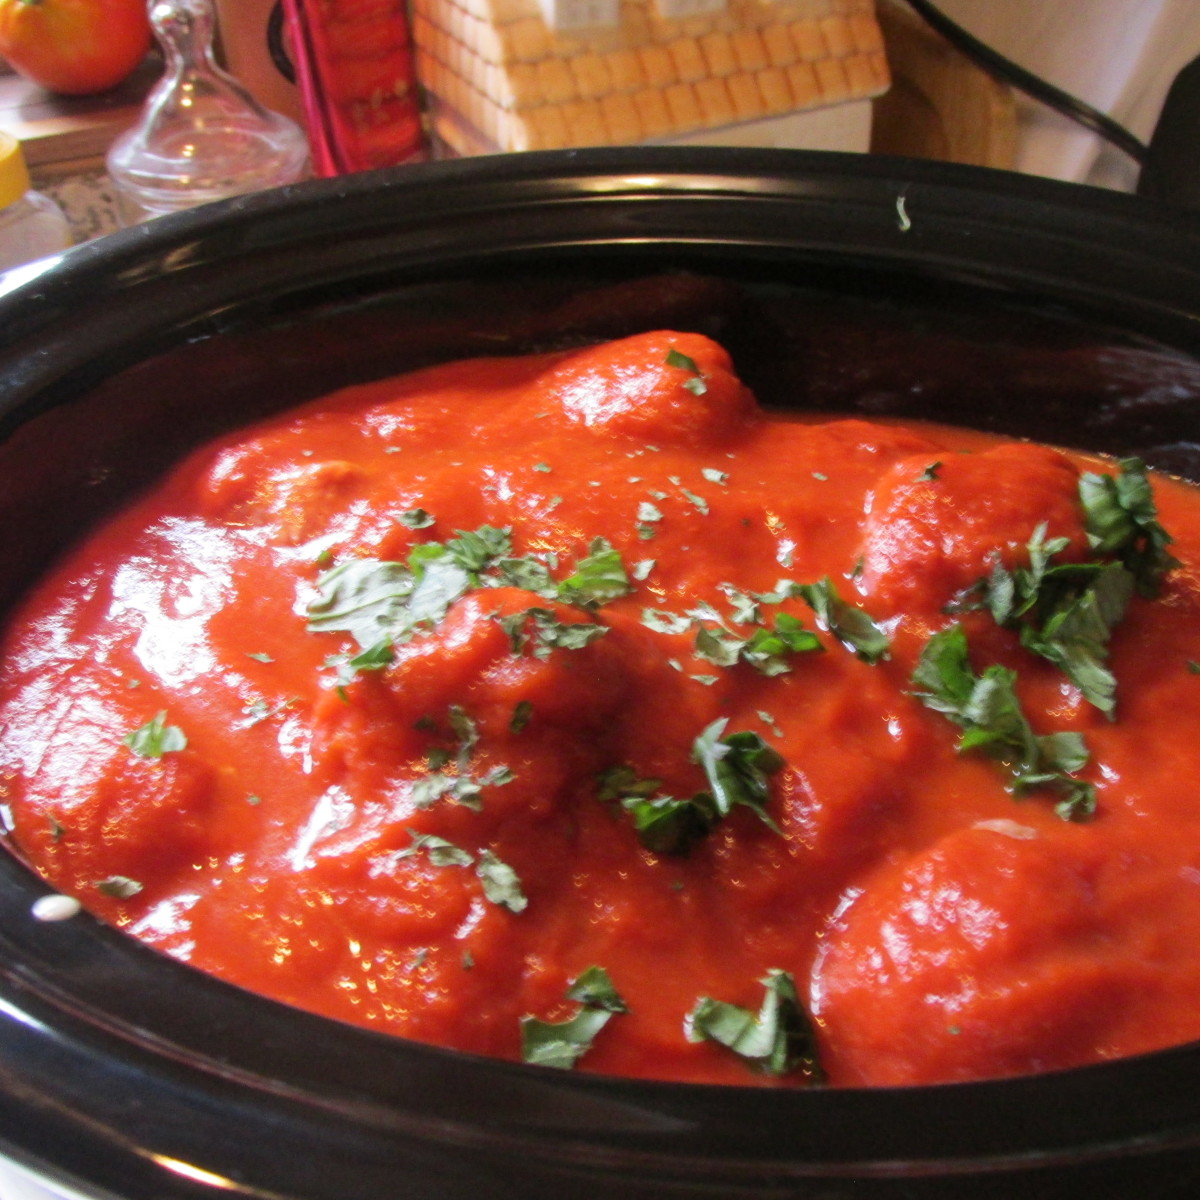 Add a second jar of tomato sauce on top of the meatballs. Add fresh chopped basil.